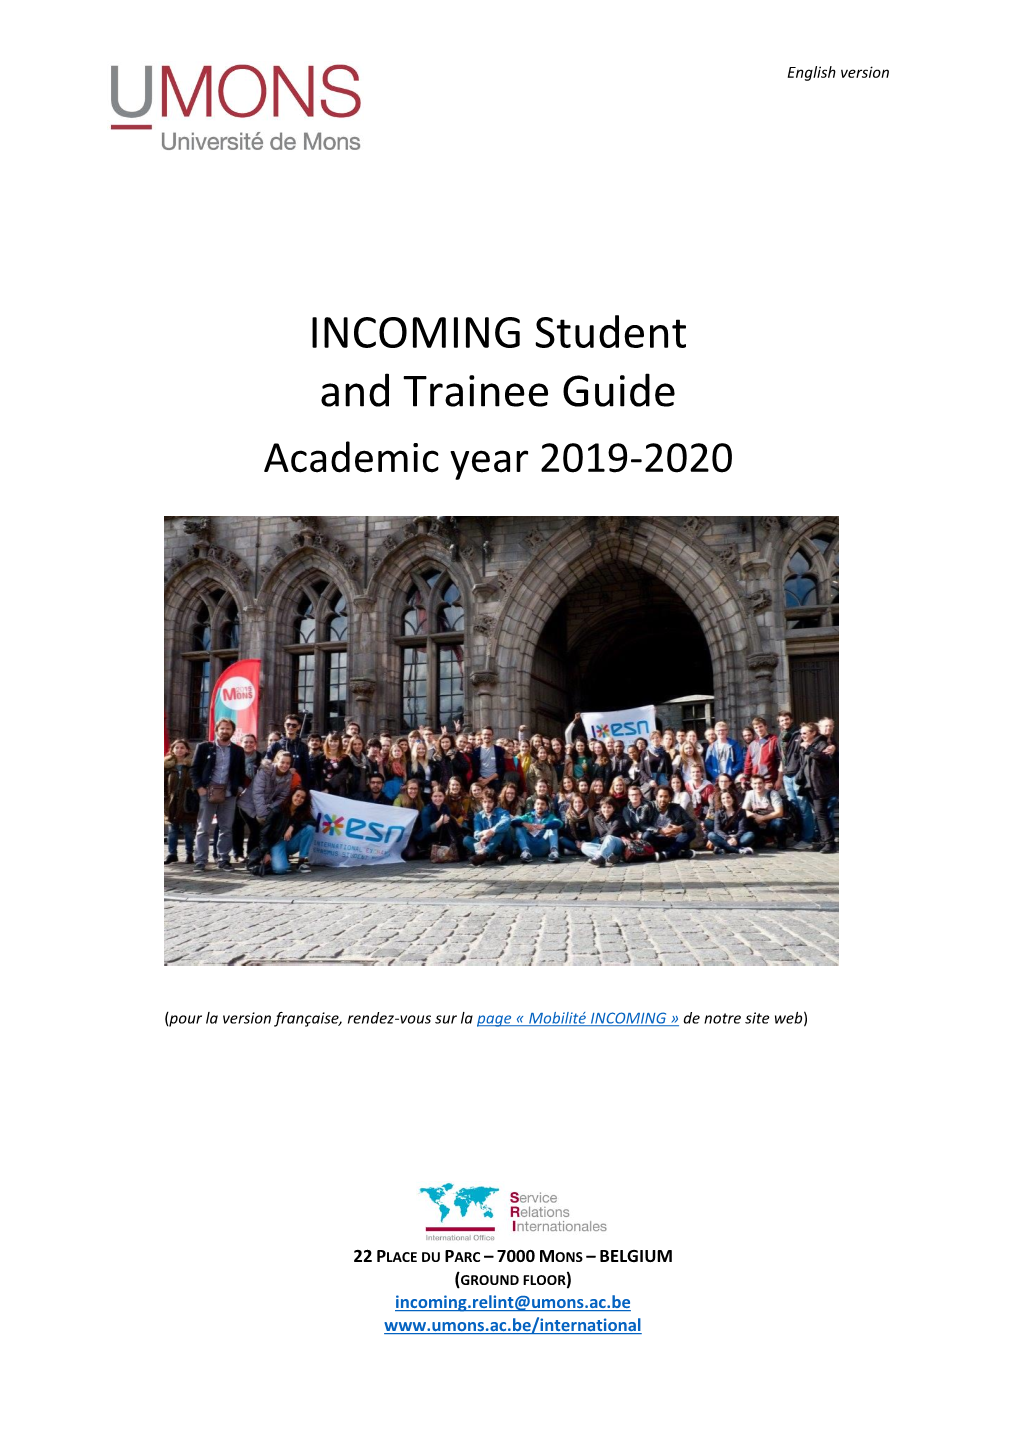 INCOMING Student and Trainee Guide Academic Year 2019-2020